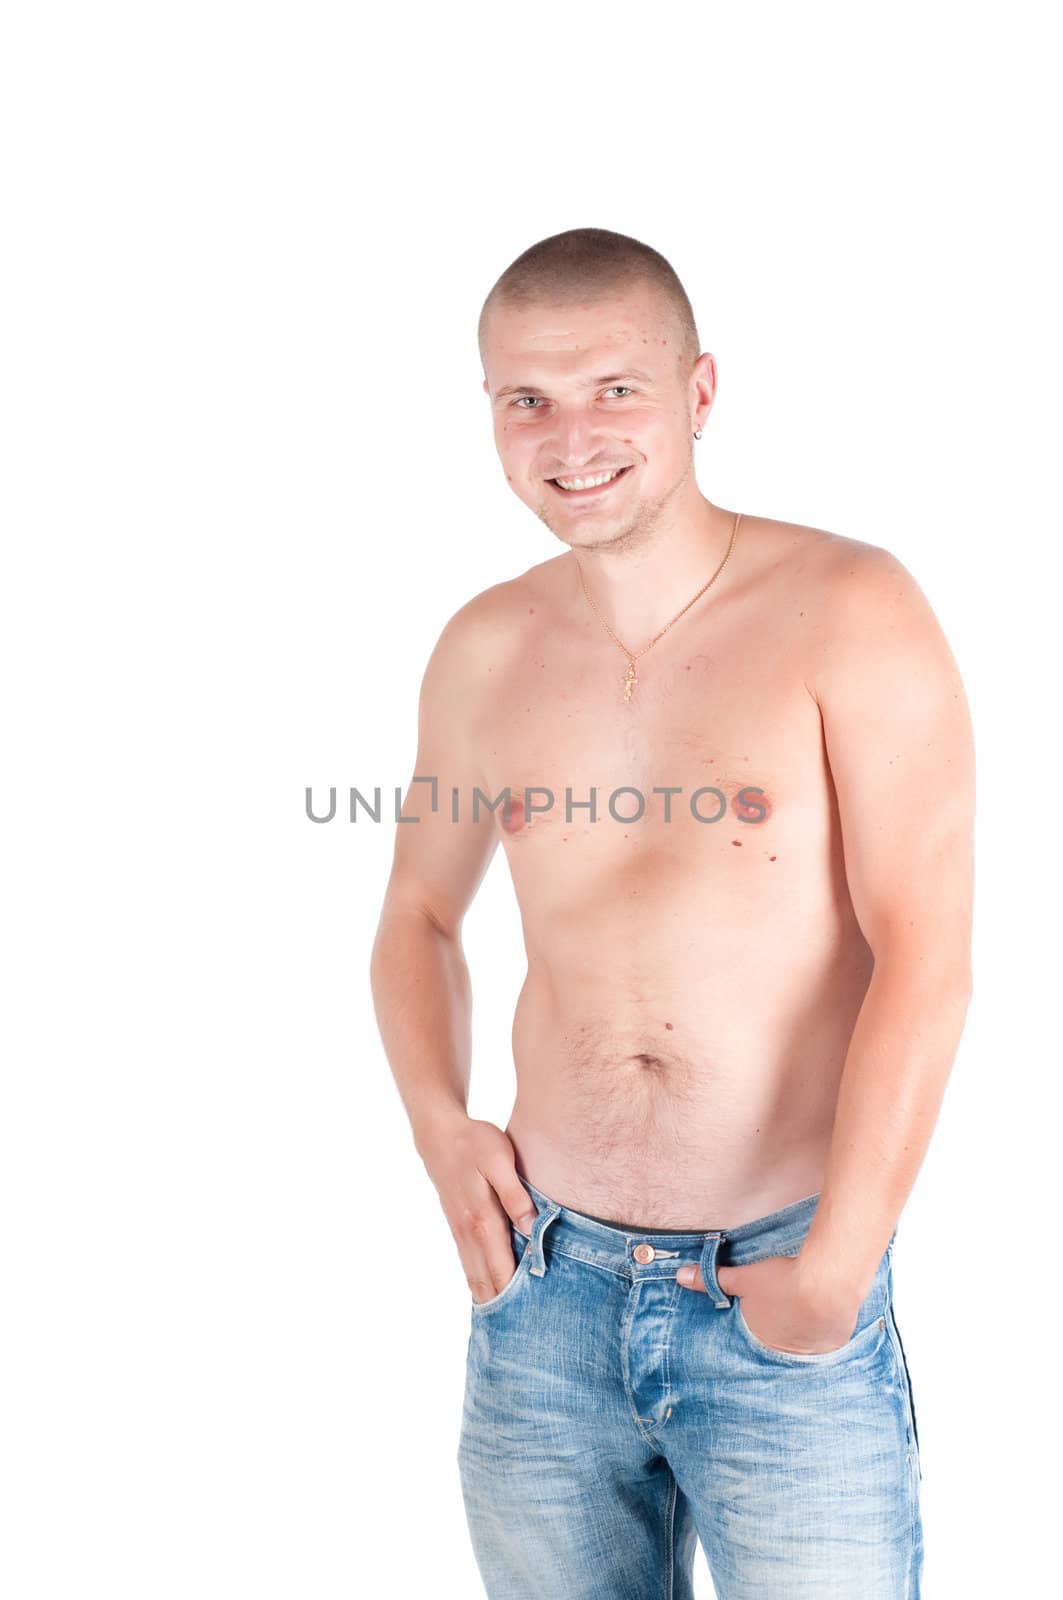 Smiling man with naked torso by anytka